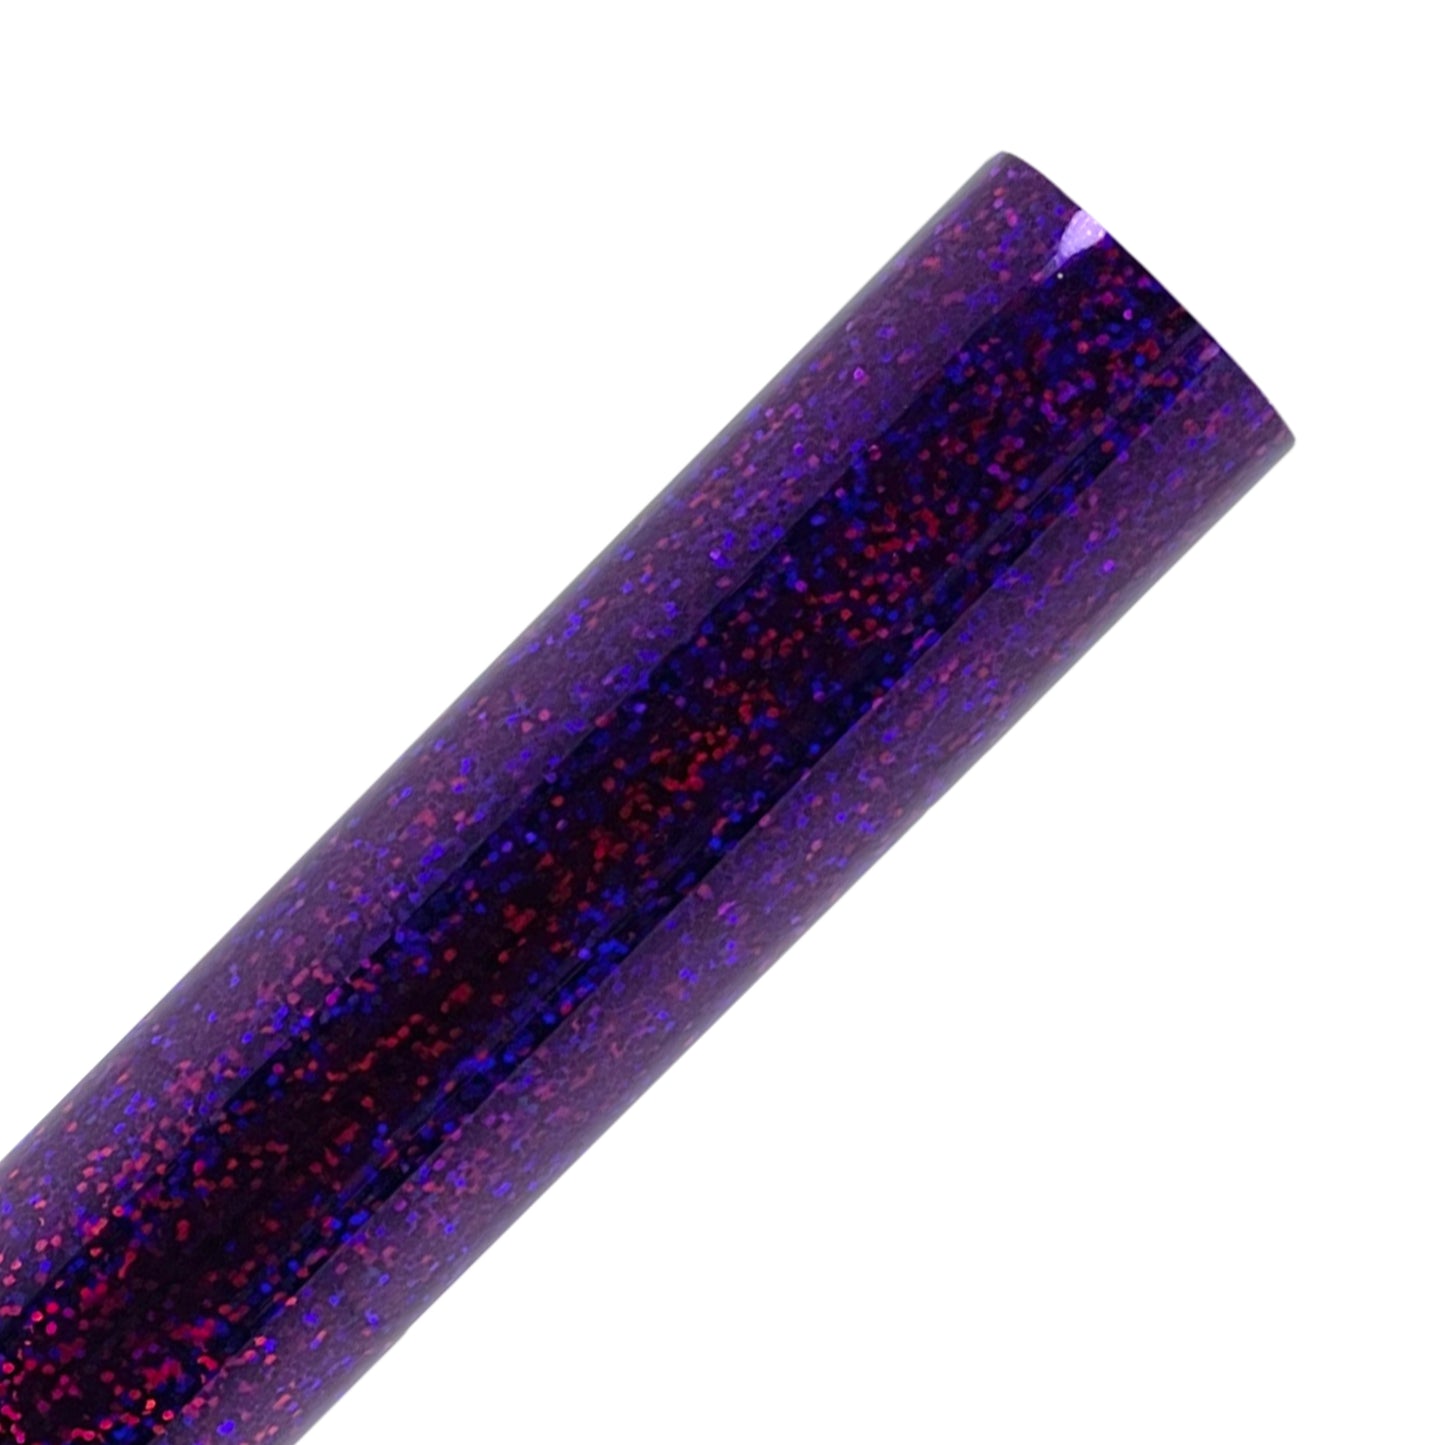 Purple Holographic Sparkle Heat Transfer Vinyl Rolls By Craftables